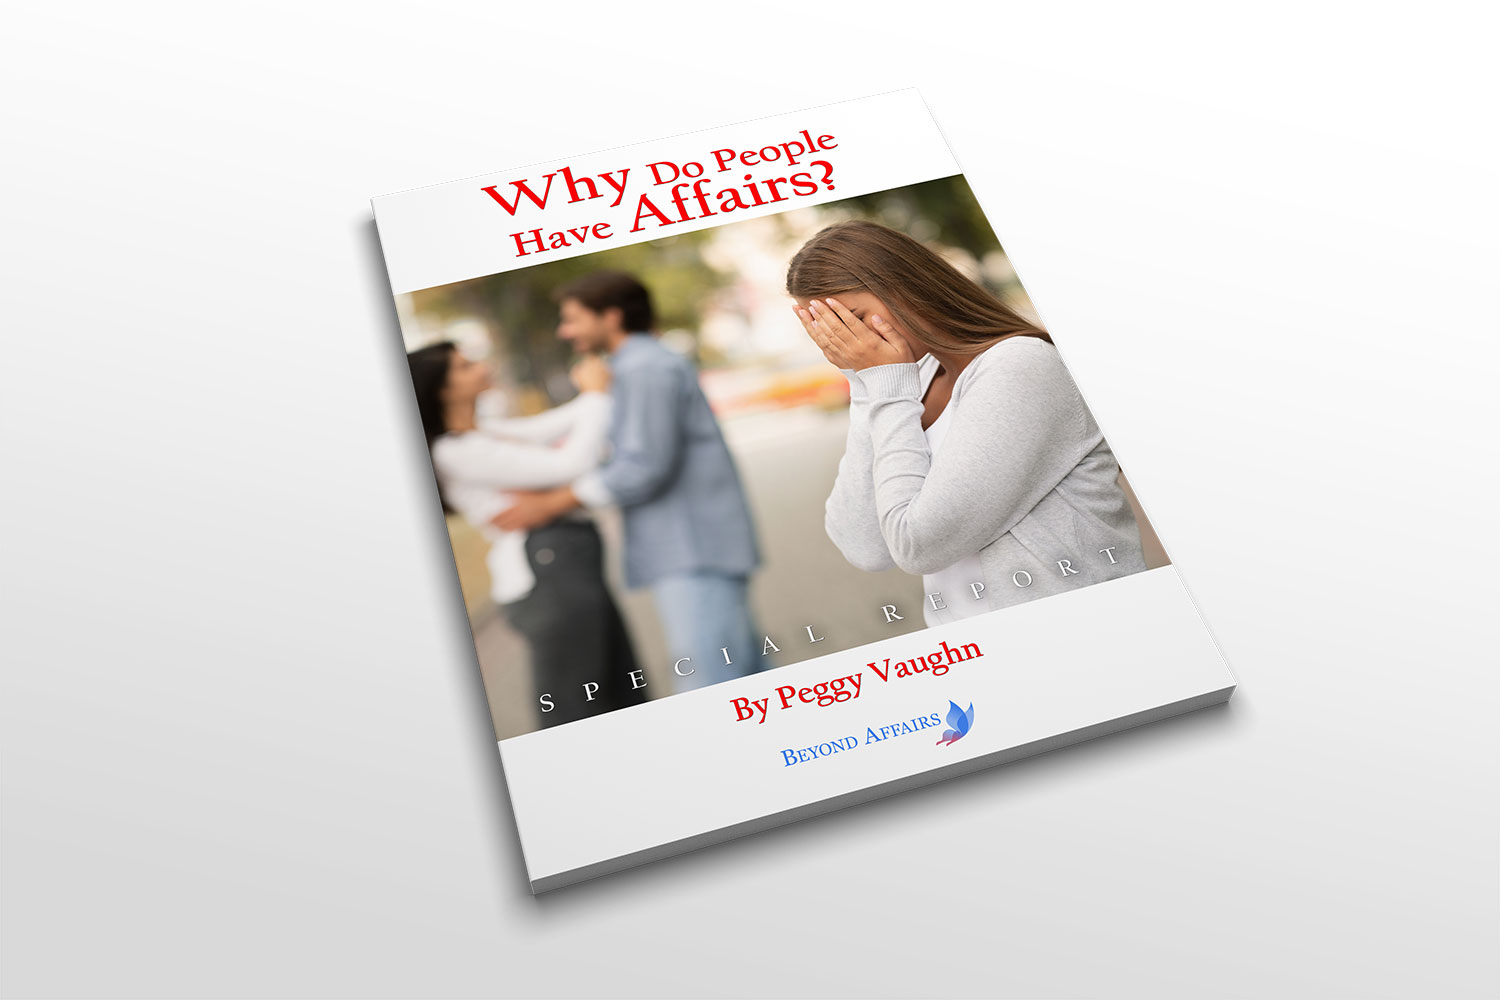 Beyond Affairs special report titled Why Do People Have Affairs